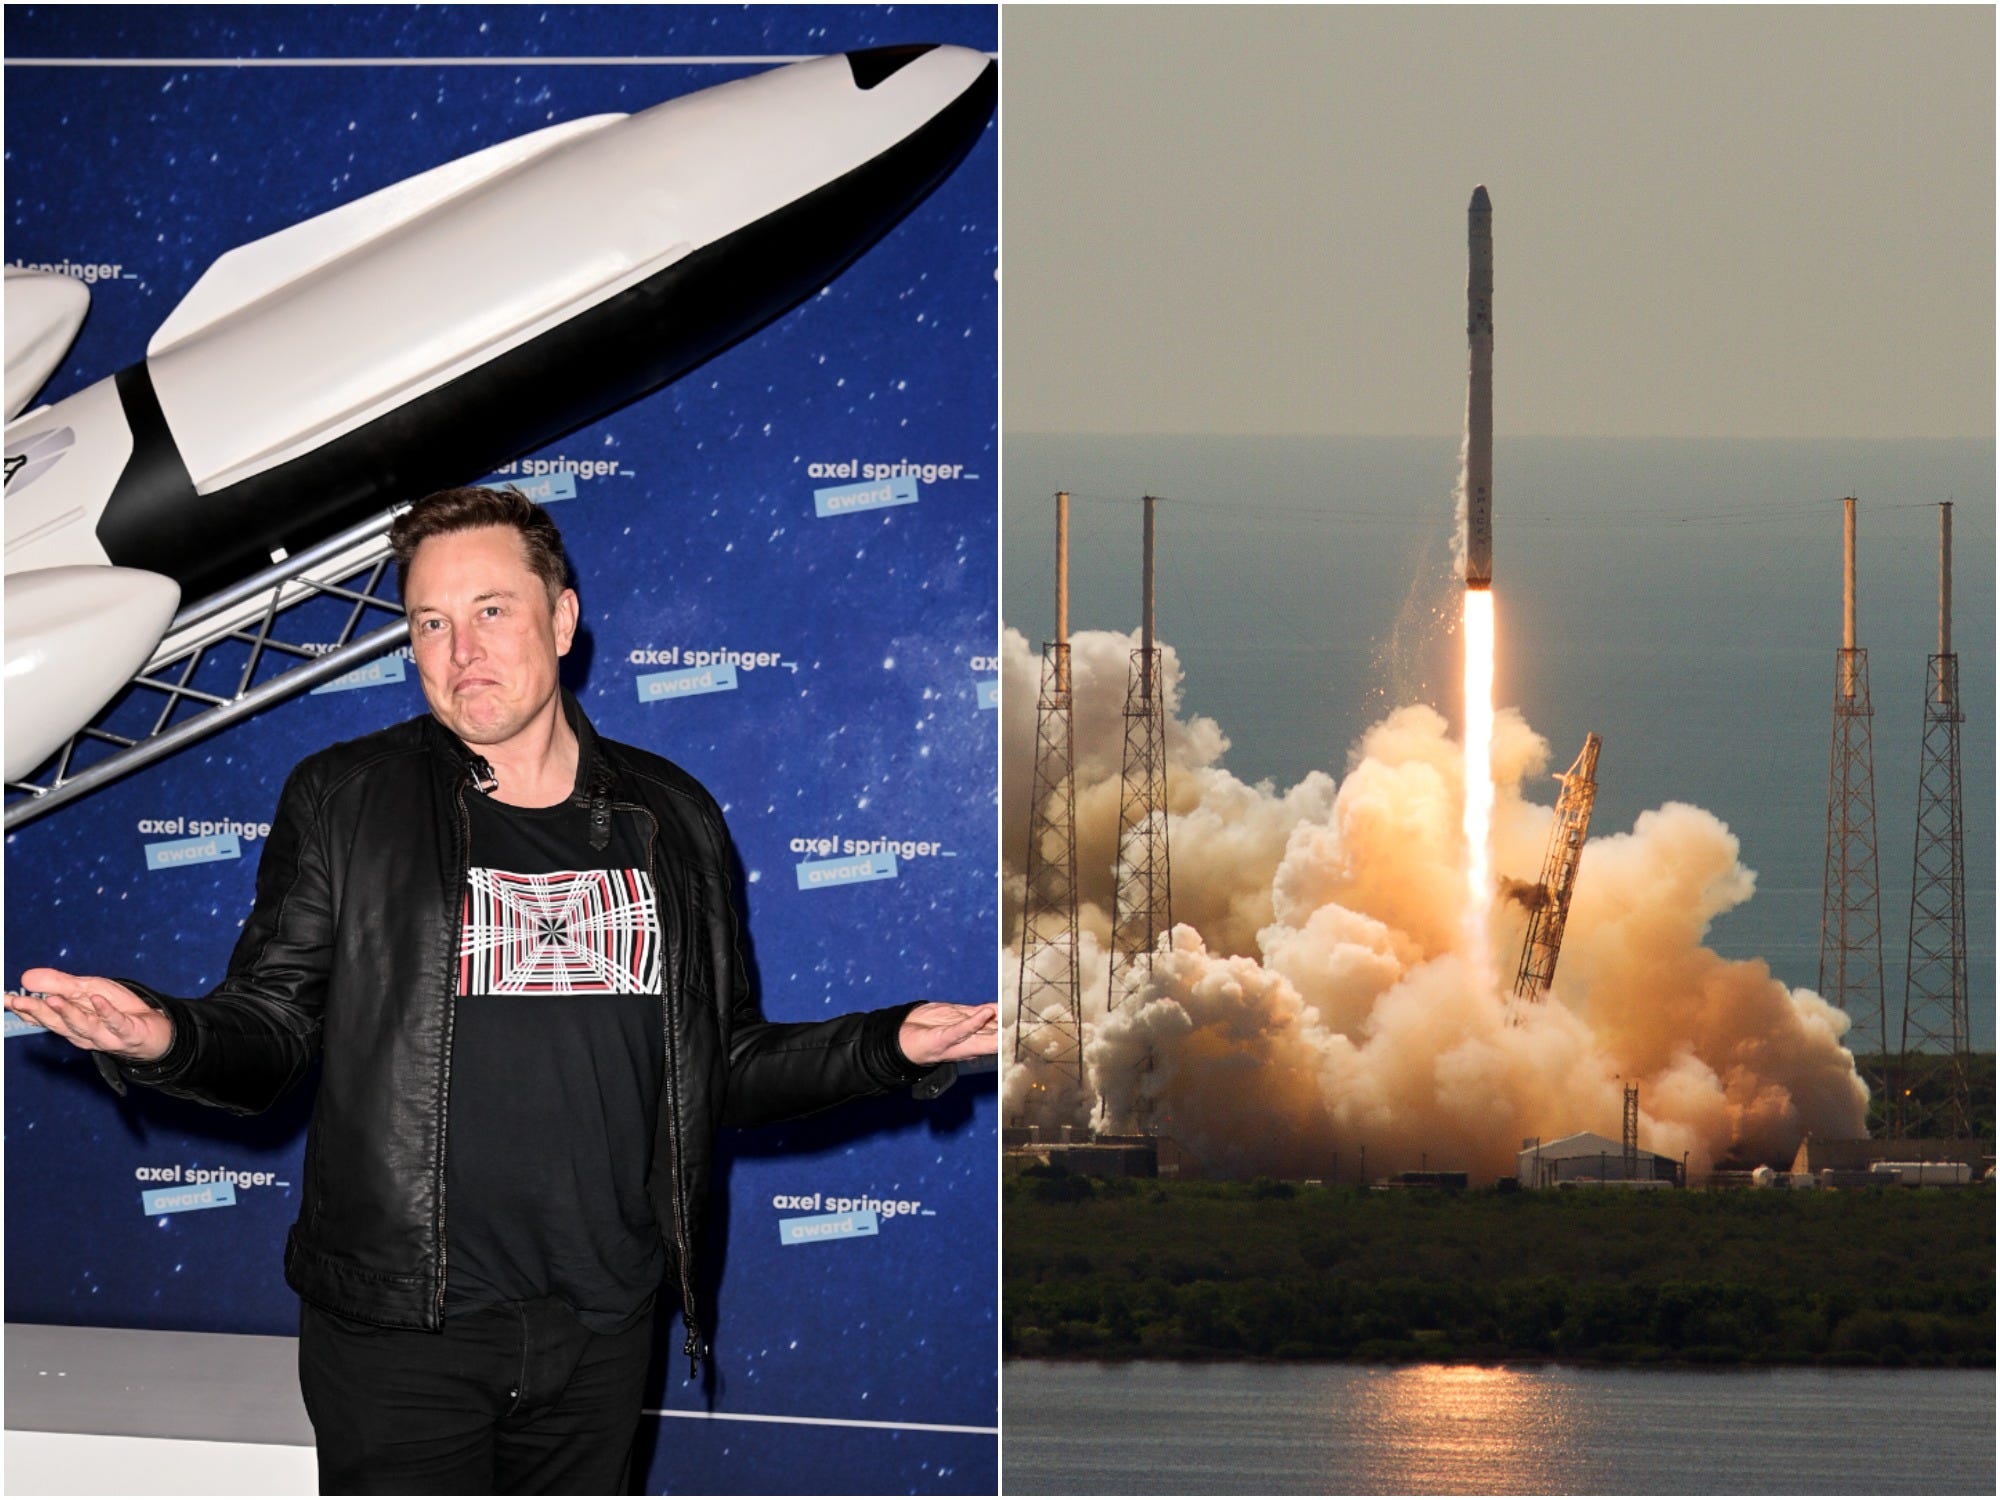 SpaceX CEO Elon Musk next to a picture of a Falcon 9 launch